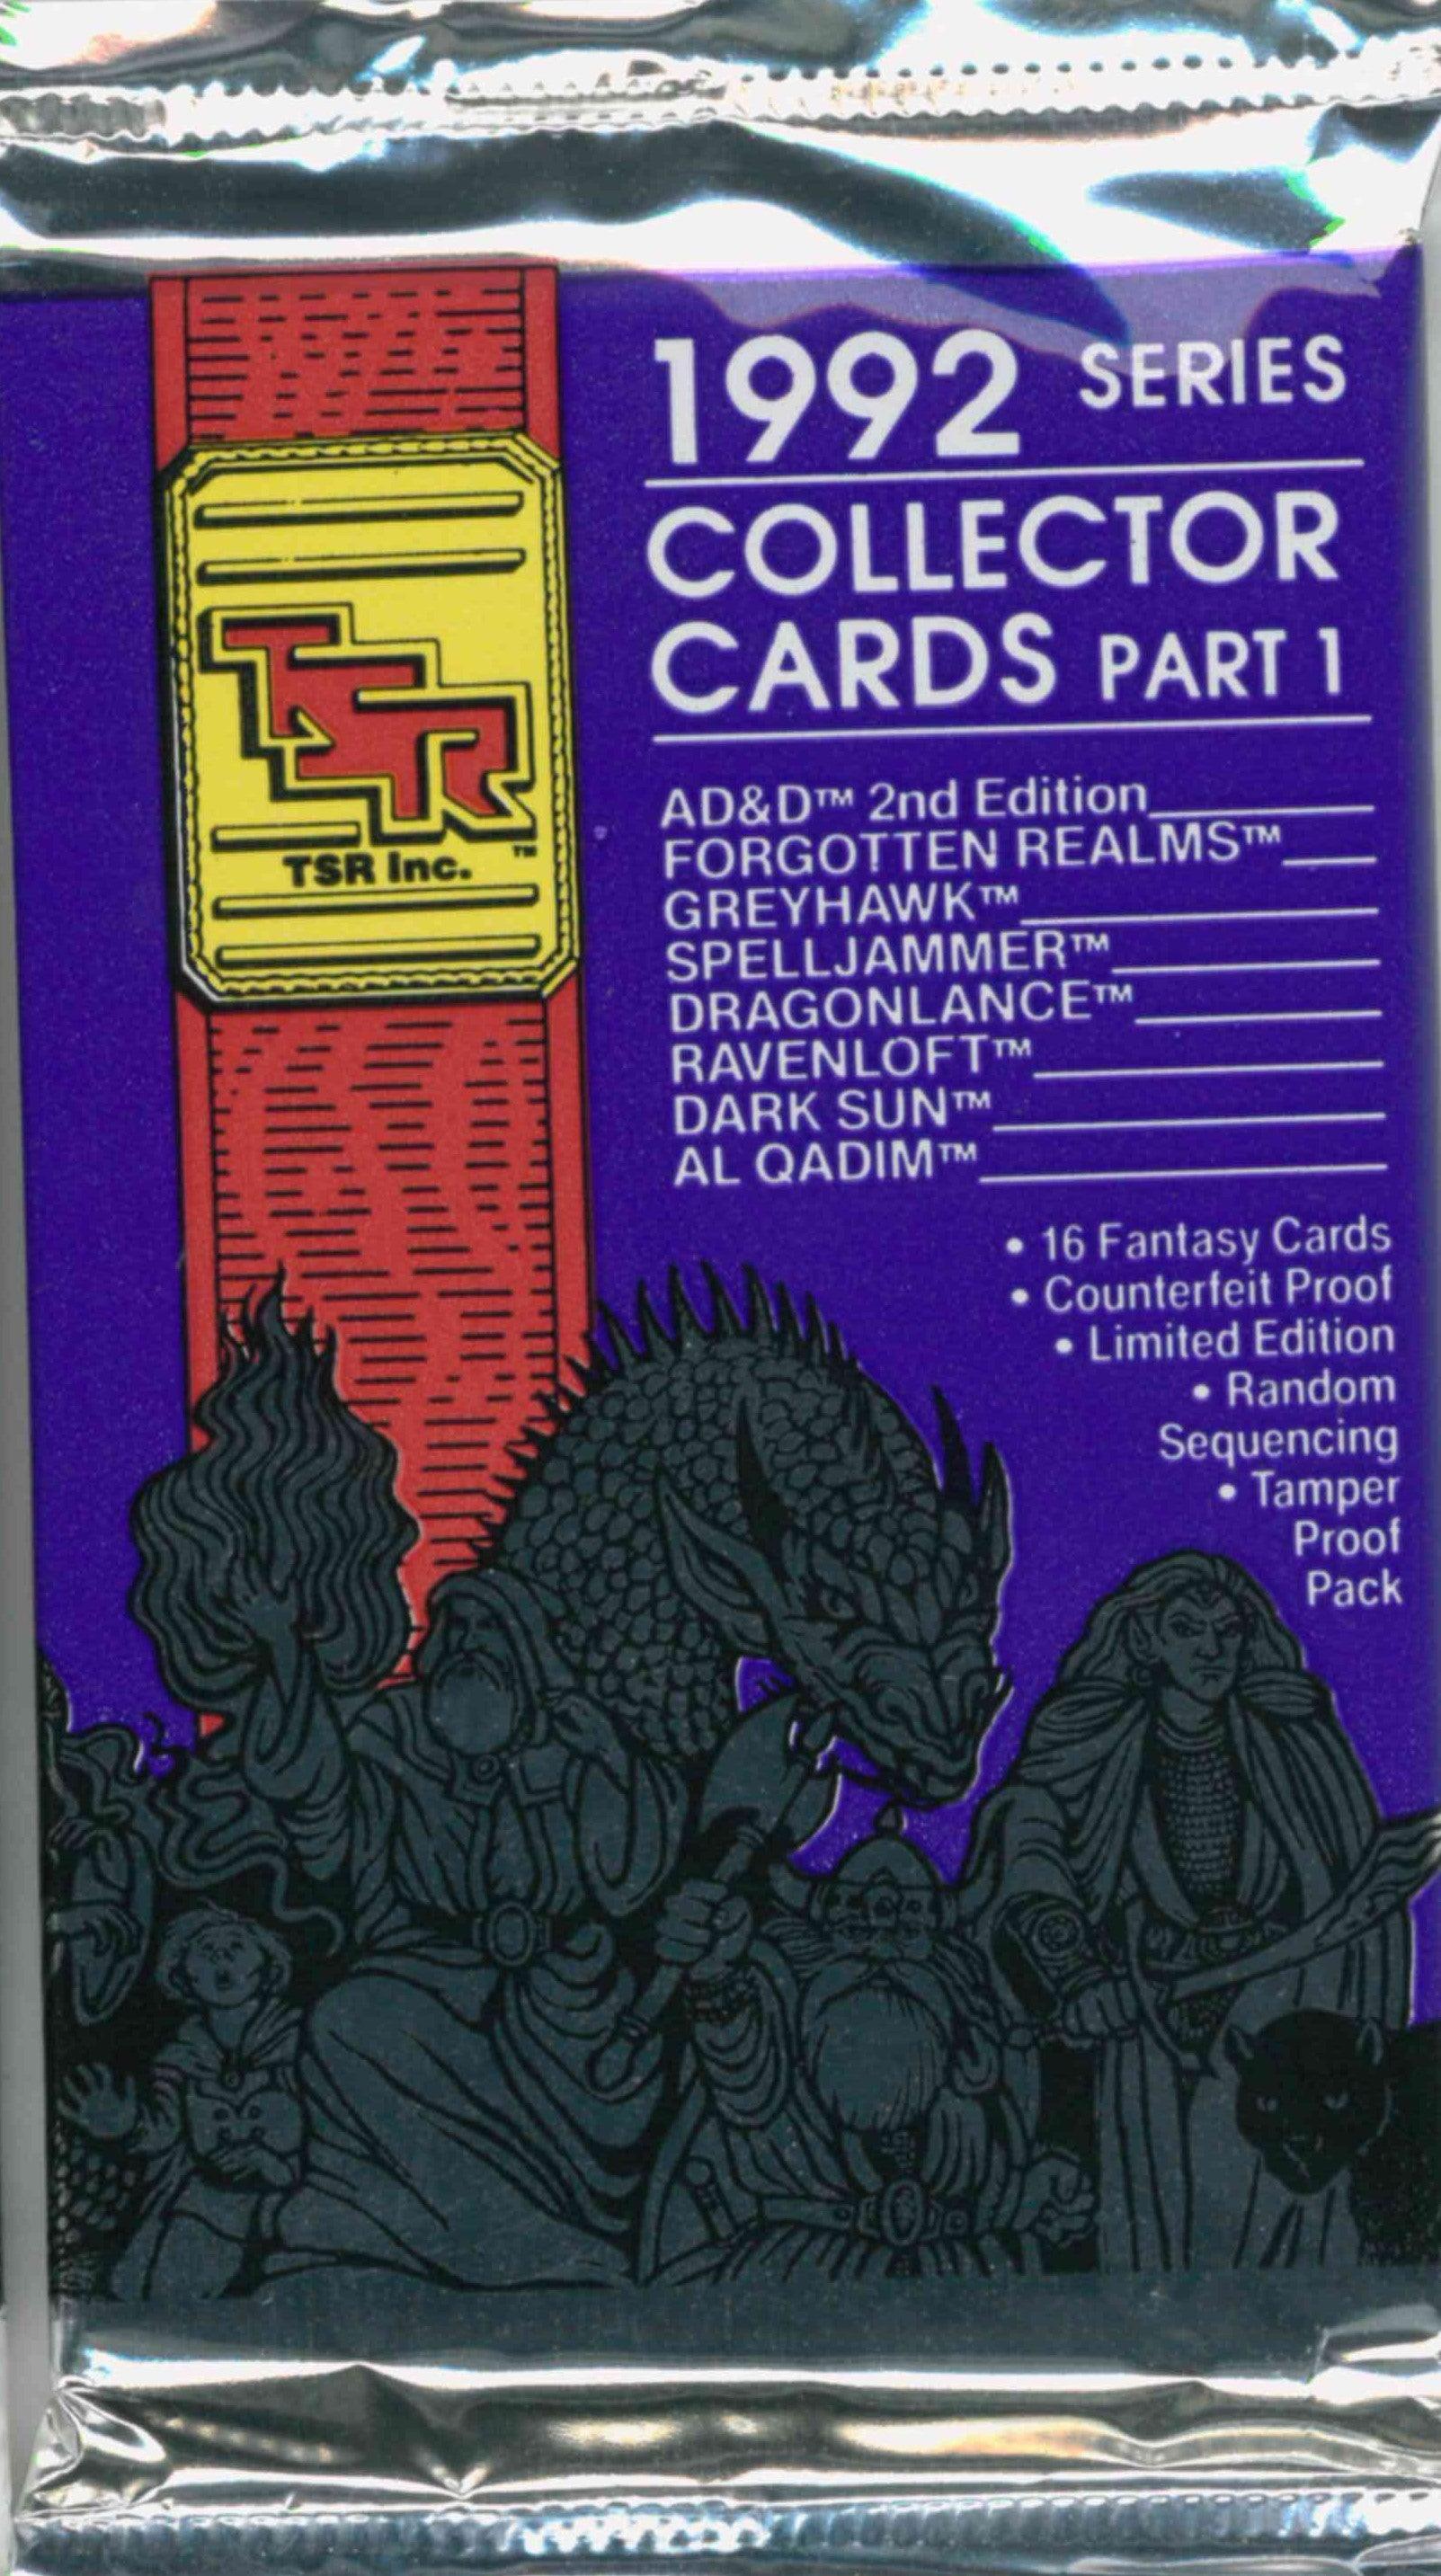 1992 ADVANCED DUNGEONS AND DRAGONS FANTASY COLLECTOR CARDS SERIES 2 PACK - Kings Comics